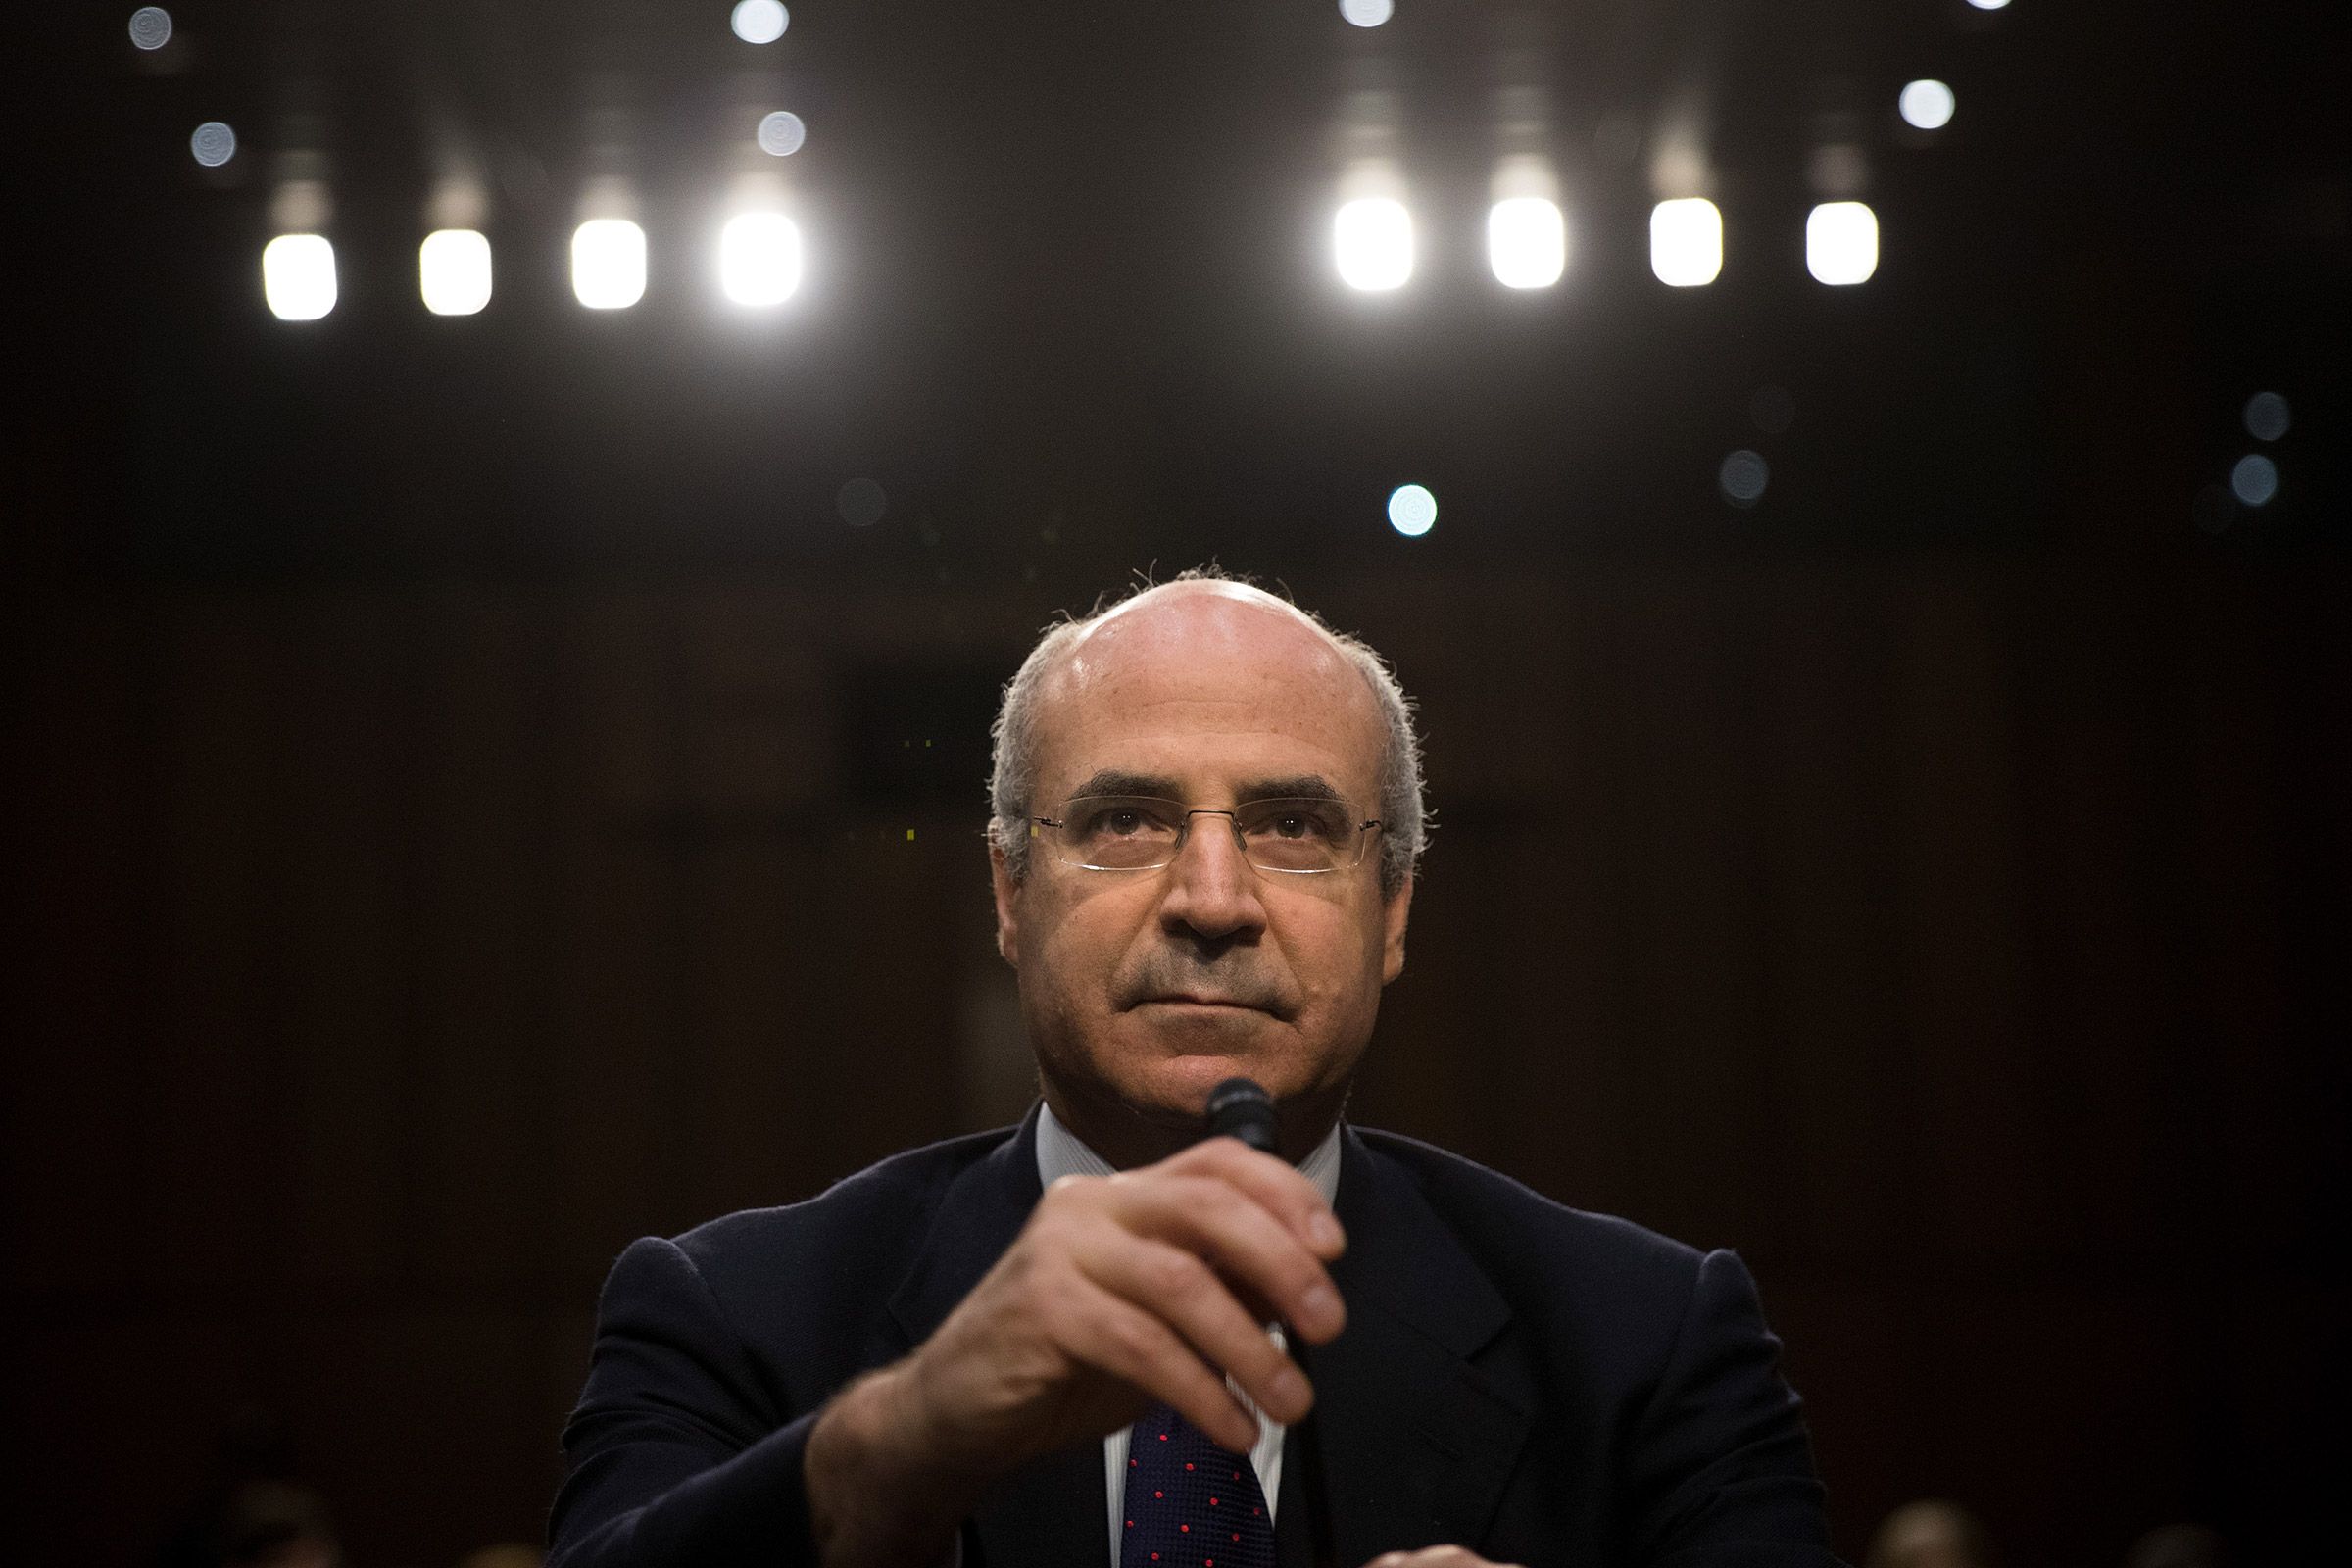 William Browder arrives for a Senate Judiciary Committee hearing titled 'Oversight of the Foreign Agents Registration Act and Attempts to Influence U.S. Elections' in the Hart Senate Office Building on Capitol Hill, July 27, 2017. (Drew Angerer—Getty Images)